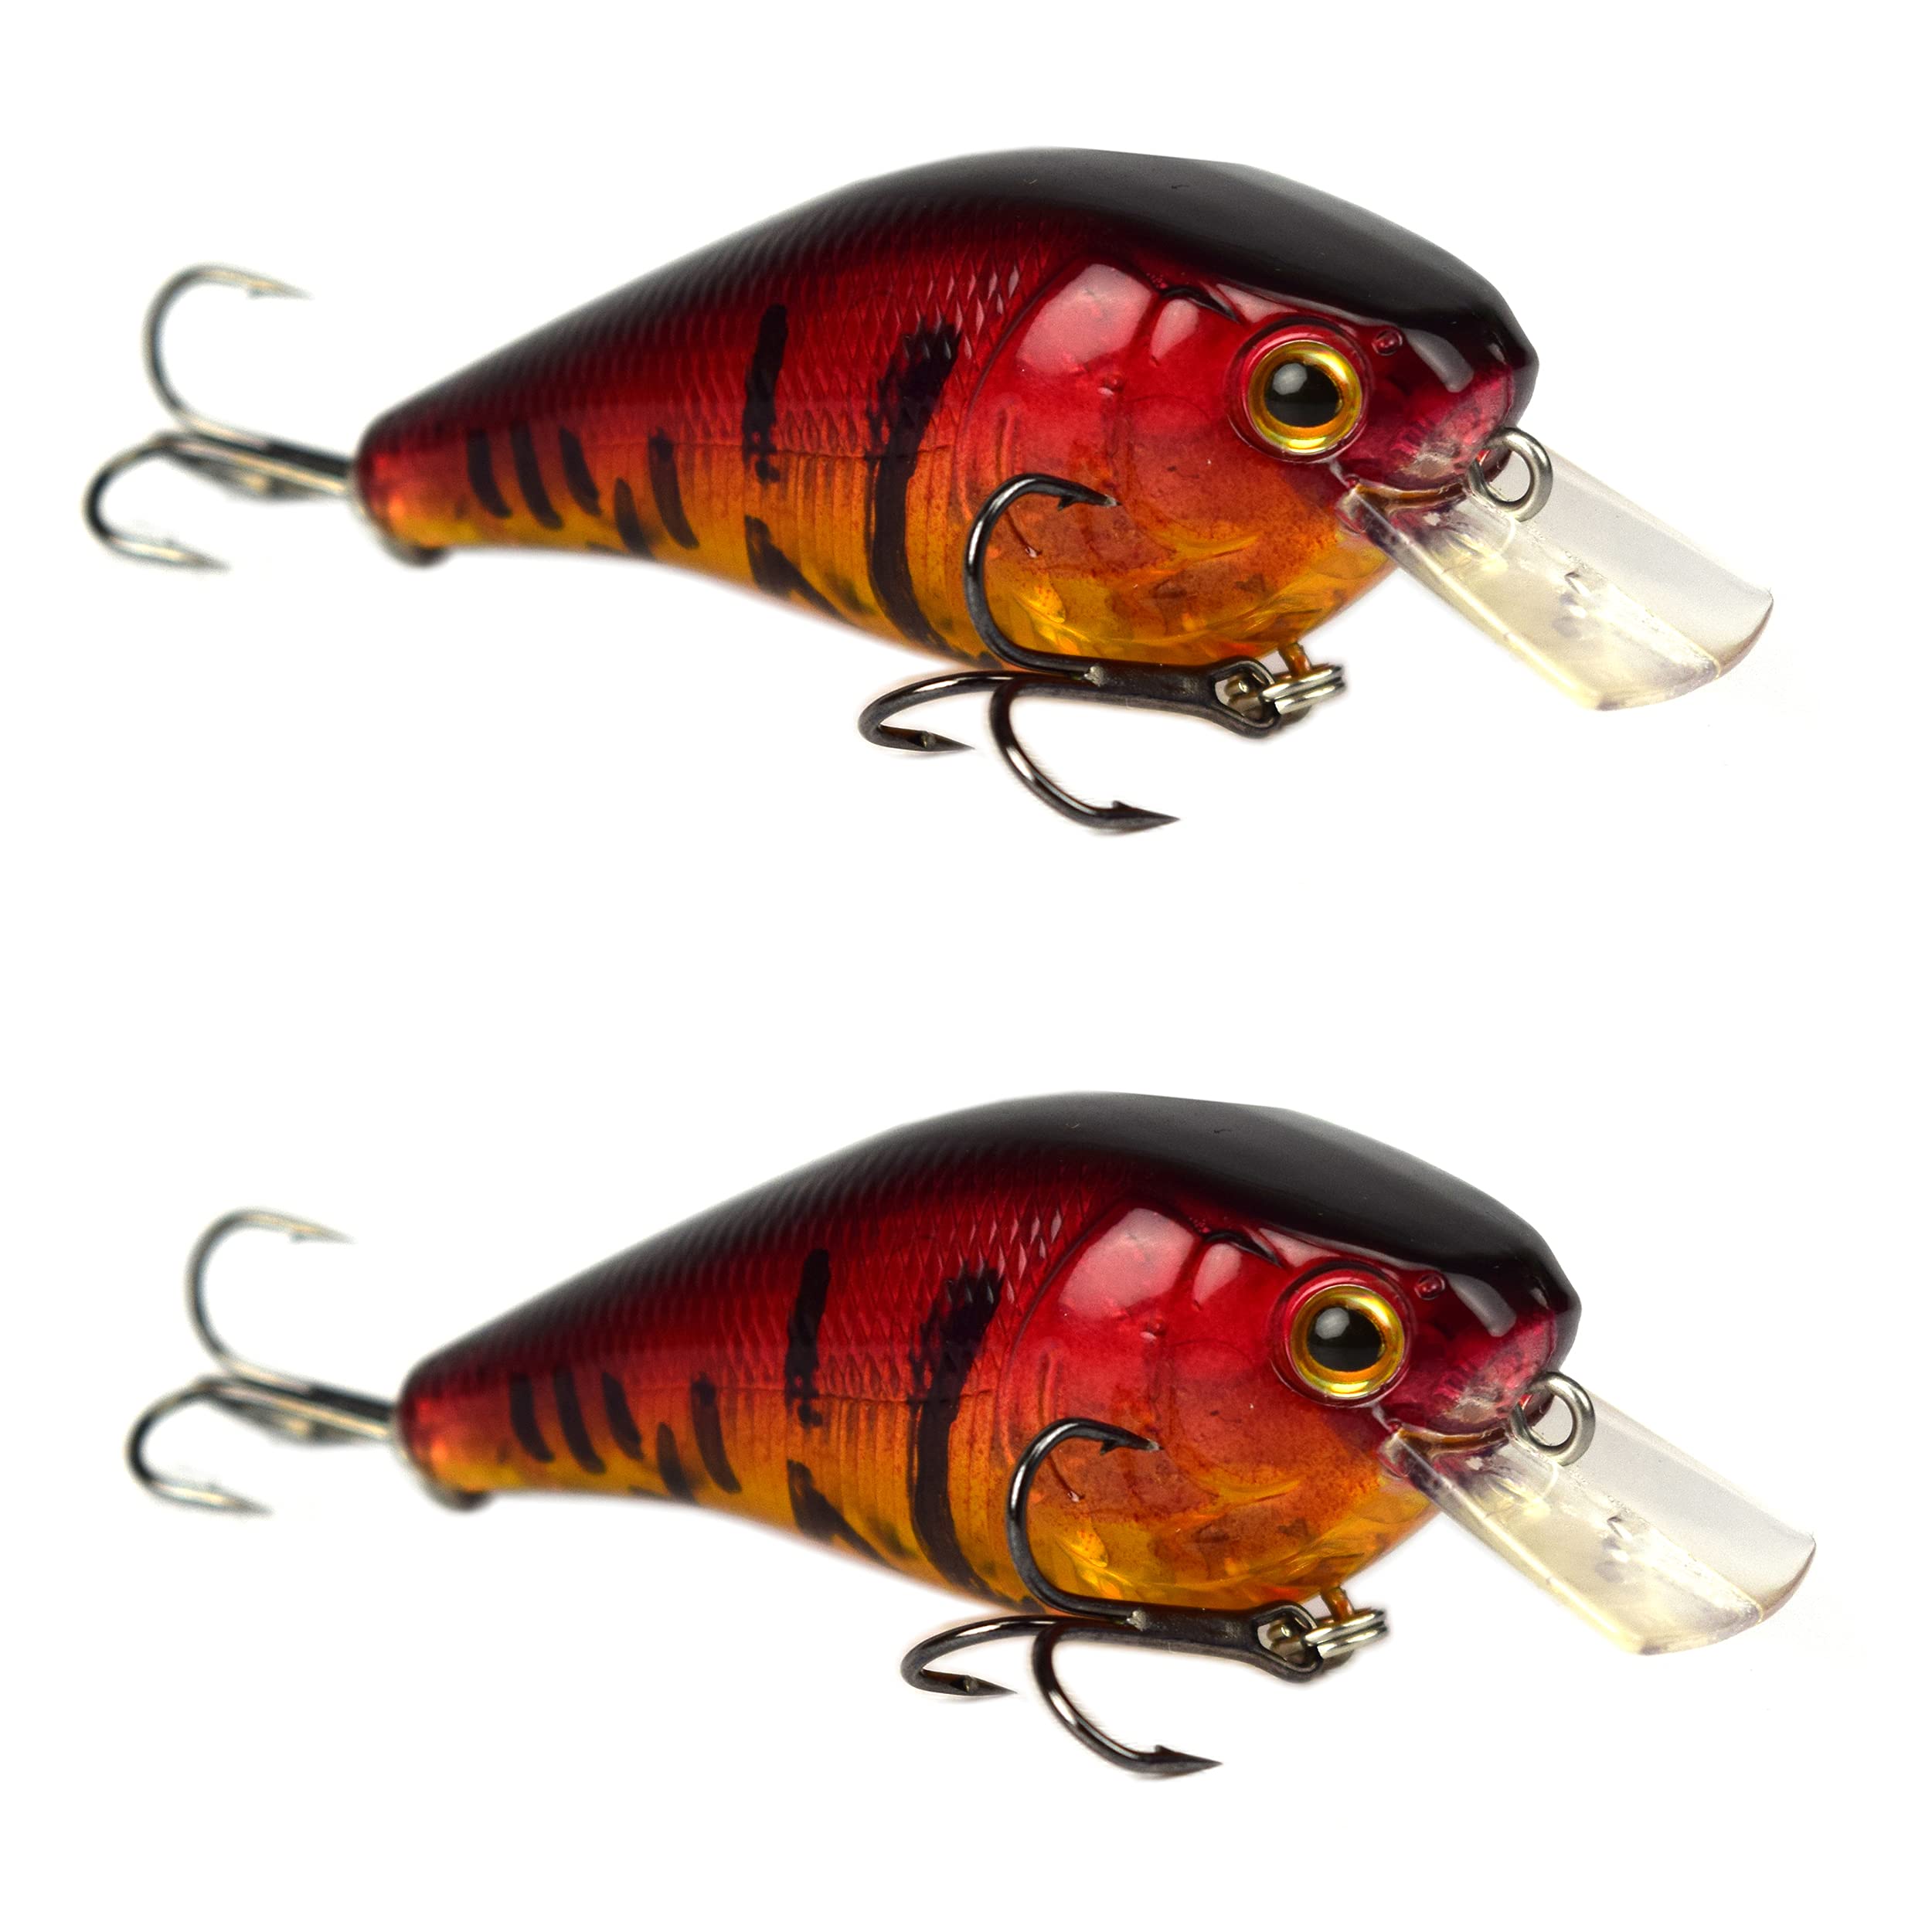 Tackle HD 2-Pack Square Bill Crankbait, 2.75 Lipped Rattle Crankbaits with  Fishing Hooks, Top Water Fishing Lures for Crappie, Walleye, Perch, or Bass  Fishing Red Craw